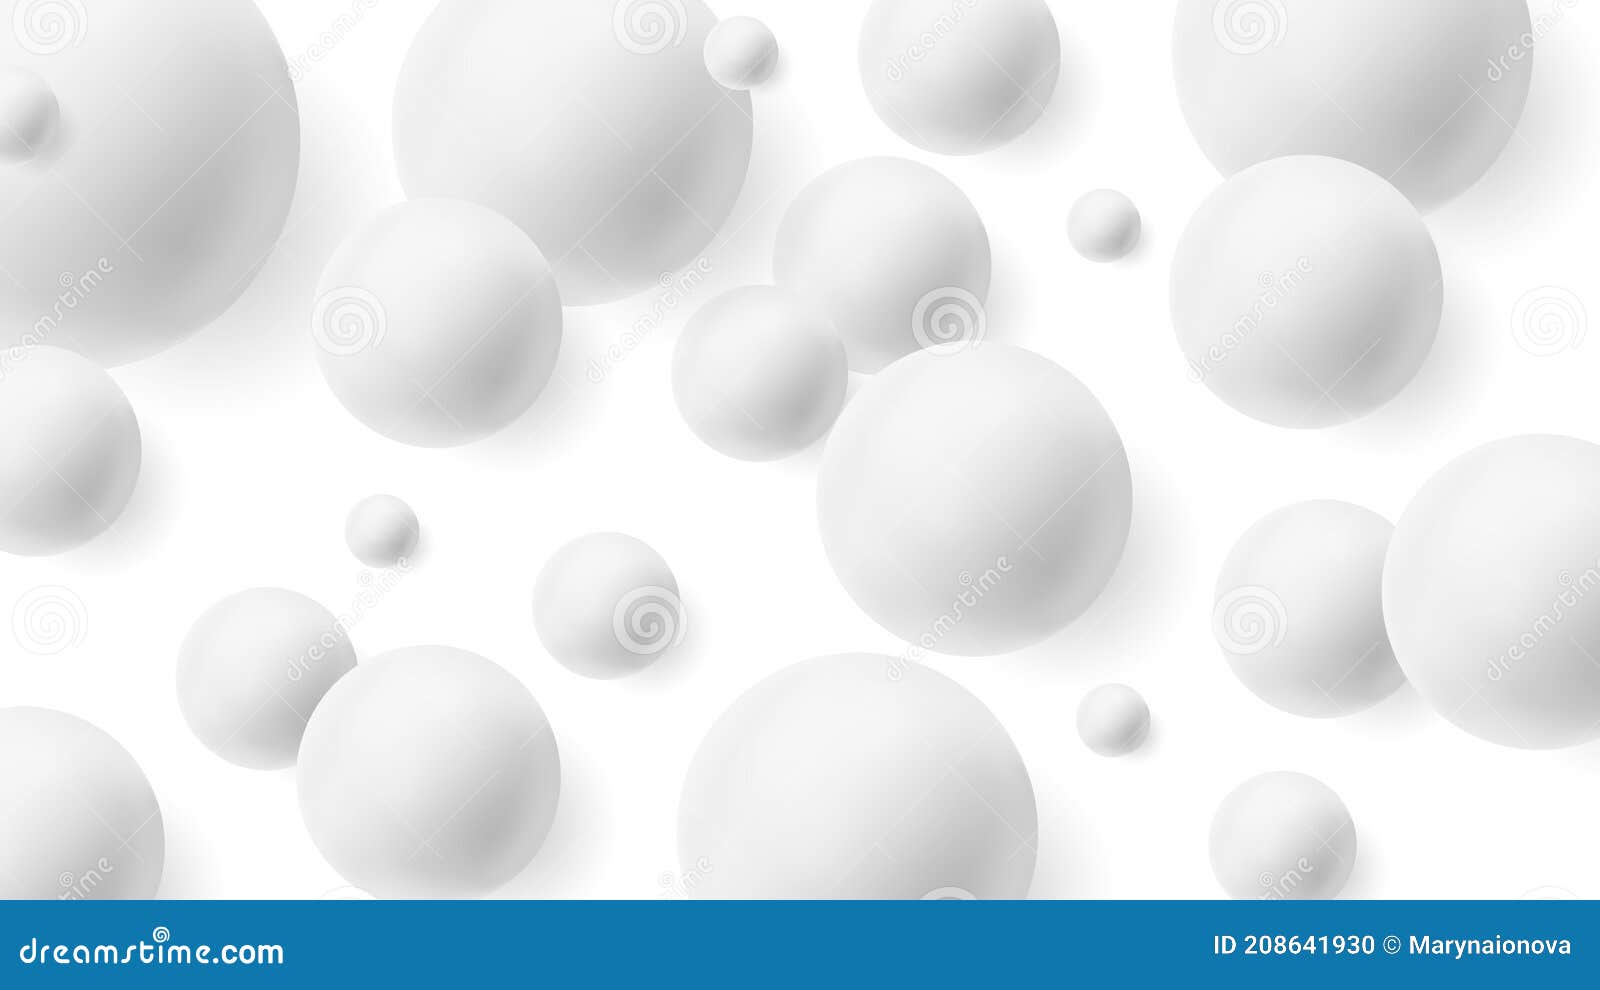 abstract 3d white spheric background, atoms moleculas 